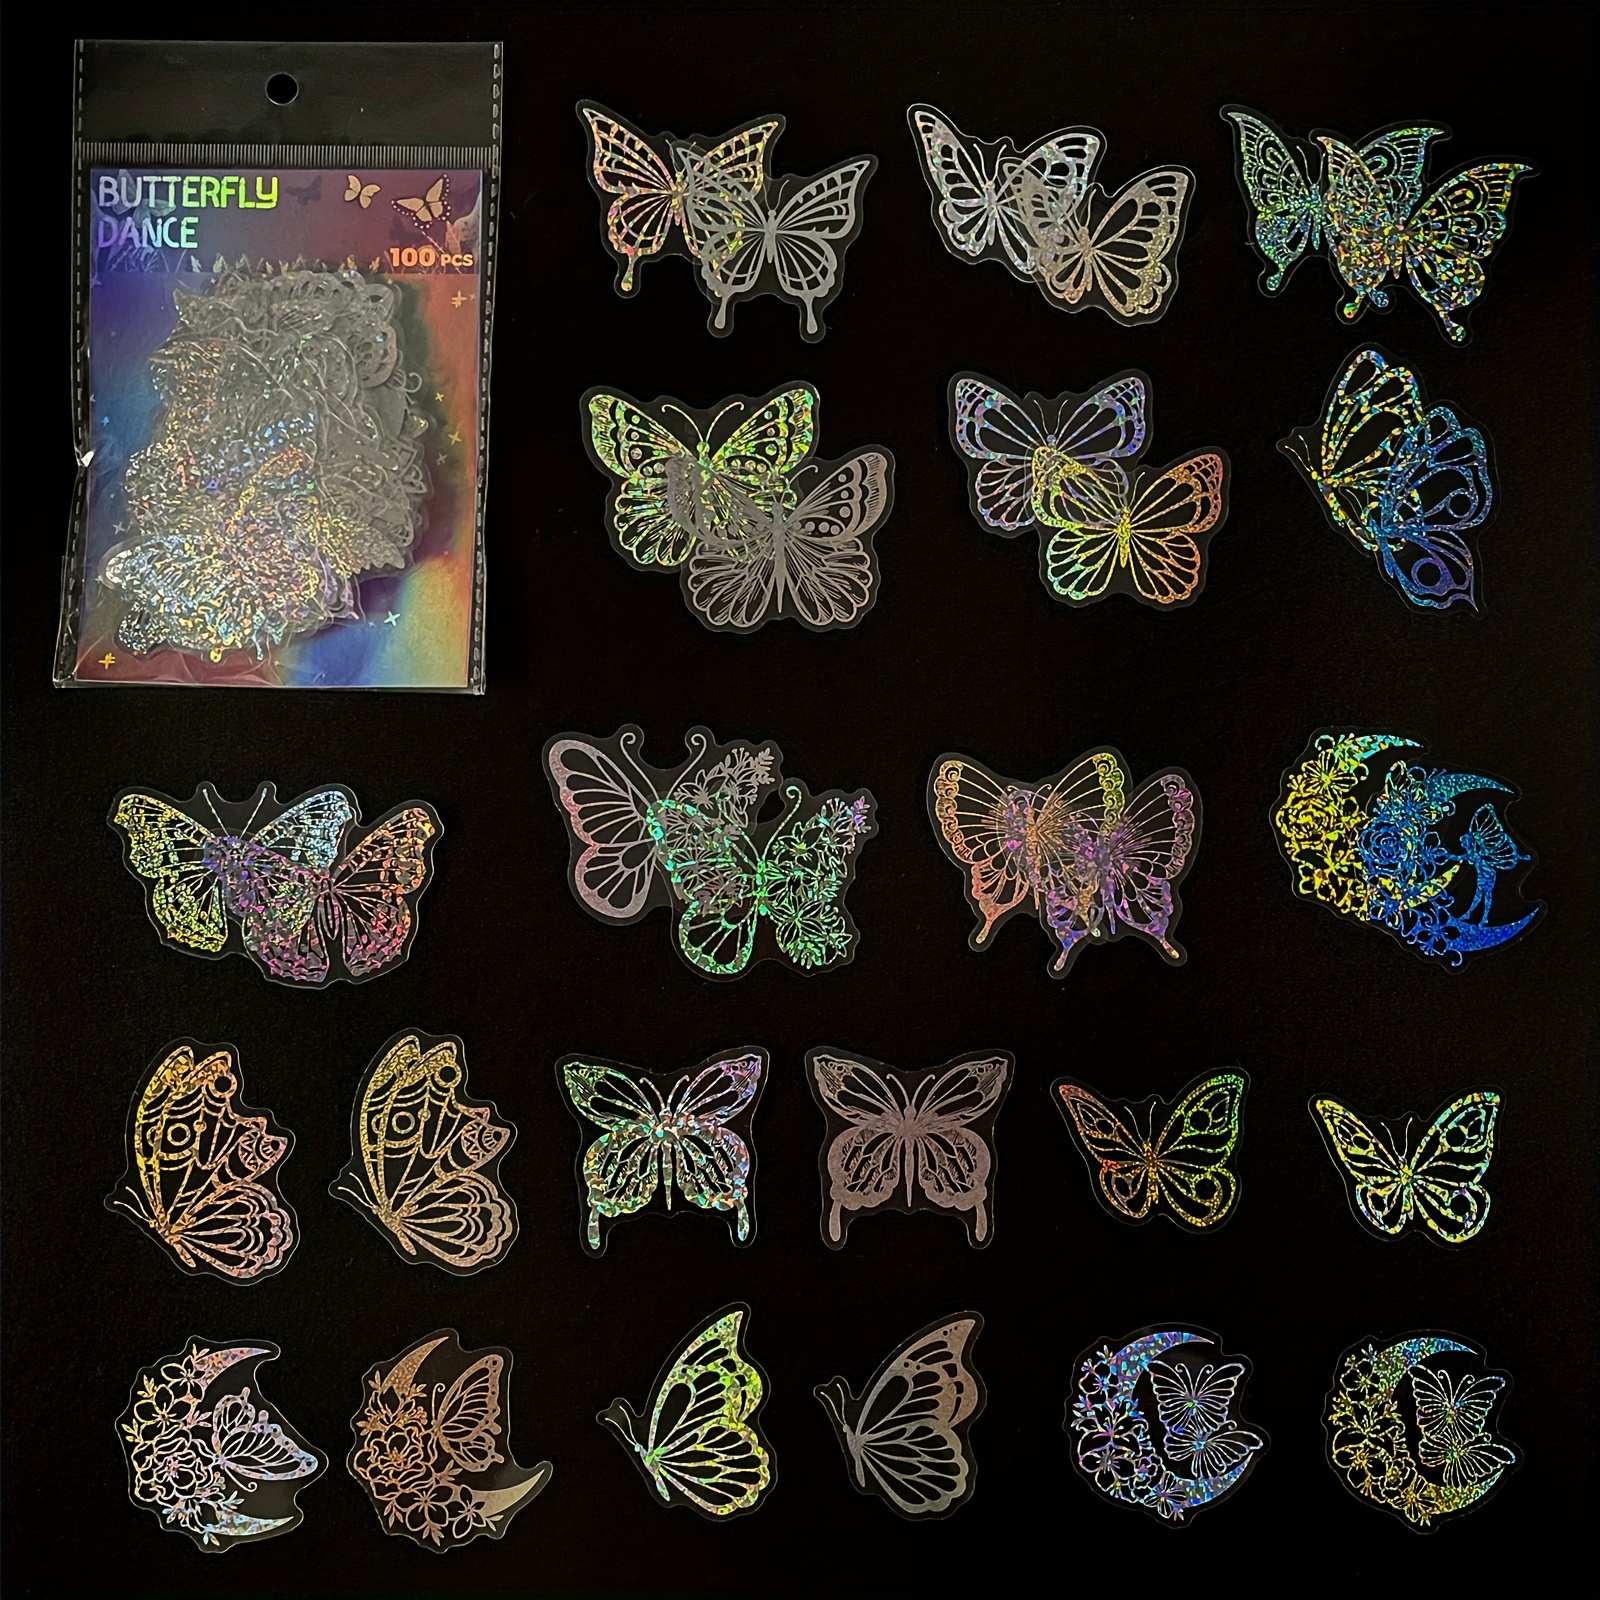 Sticker - Holographic Foil Stickers Pet Stickers - Ocean, Magic, Butterfly, Flower, Forest, Unicorn